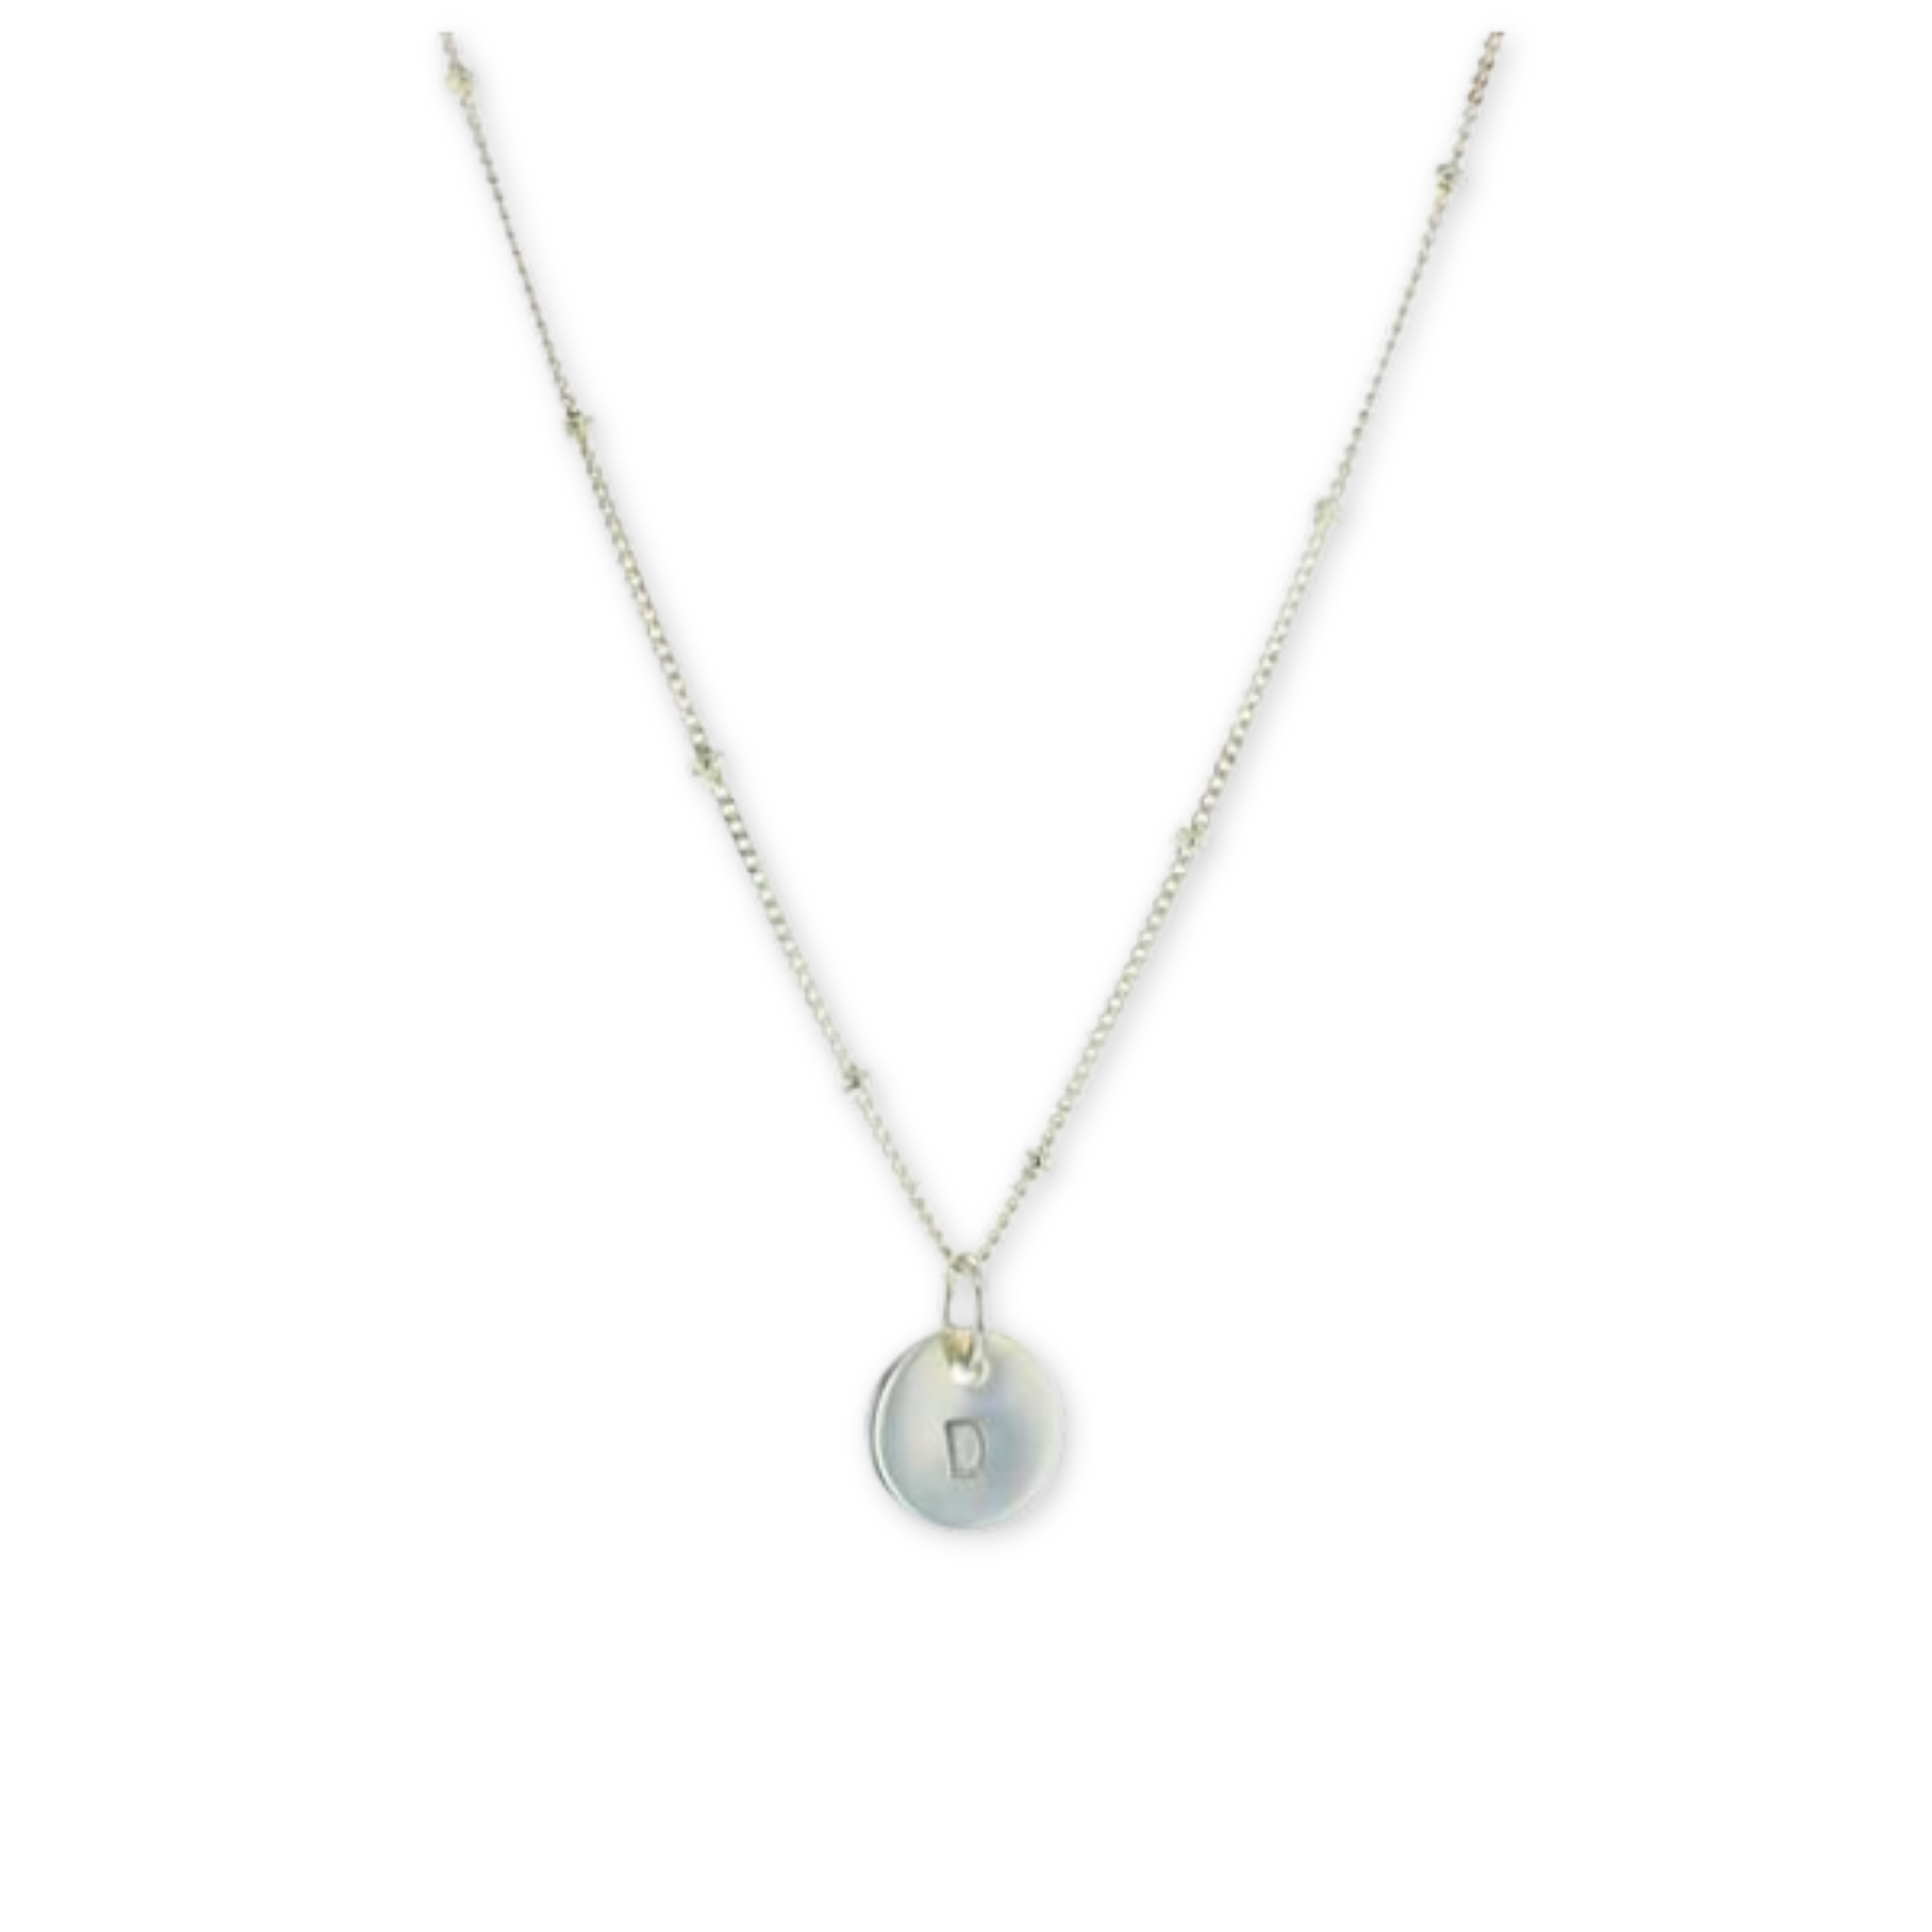 thin necklace with a hanging round disc pendant stamped with a letter on a chain